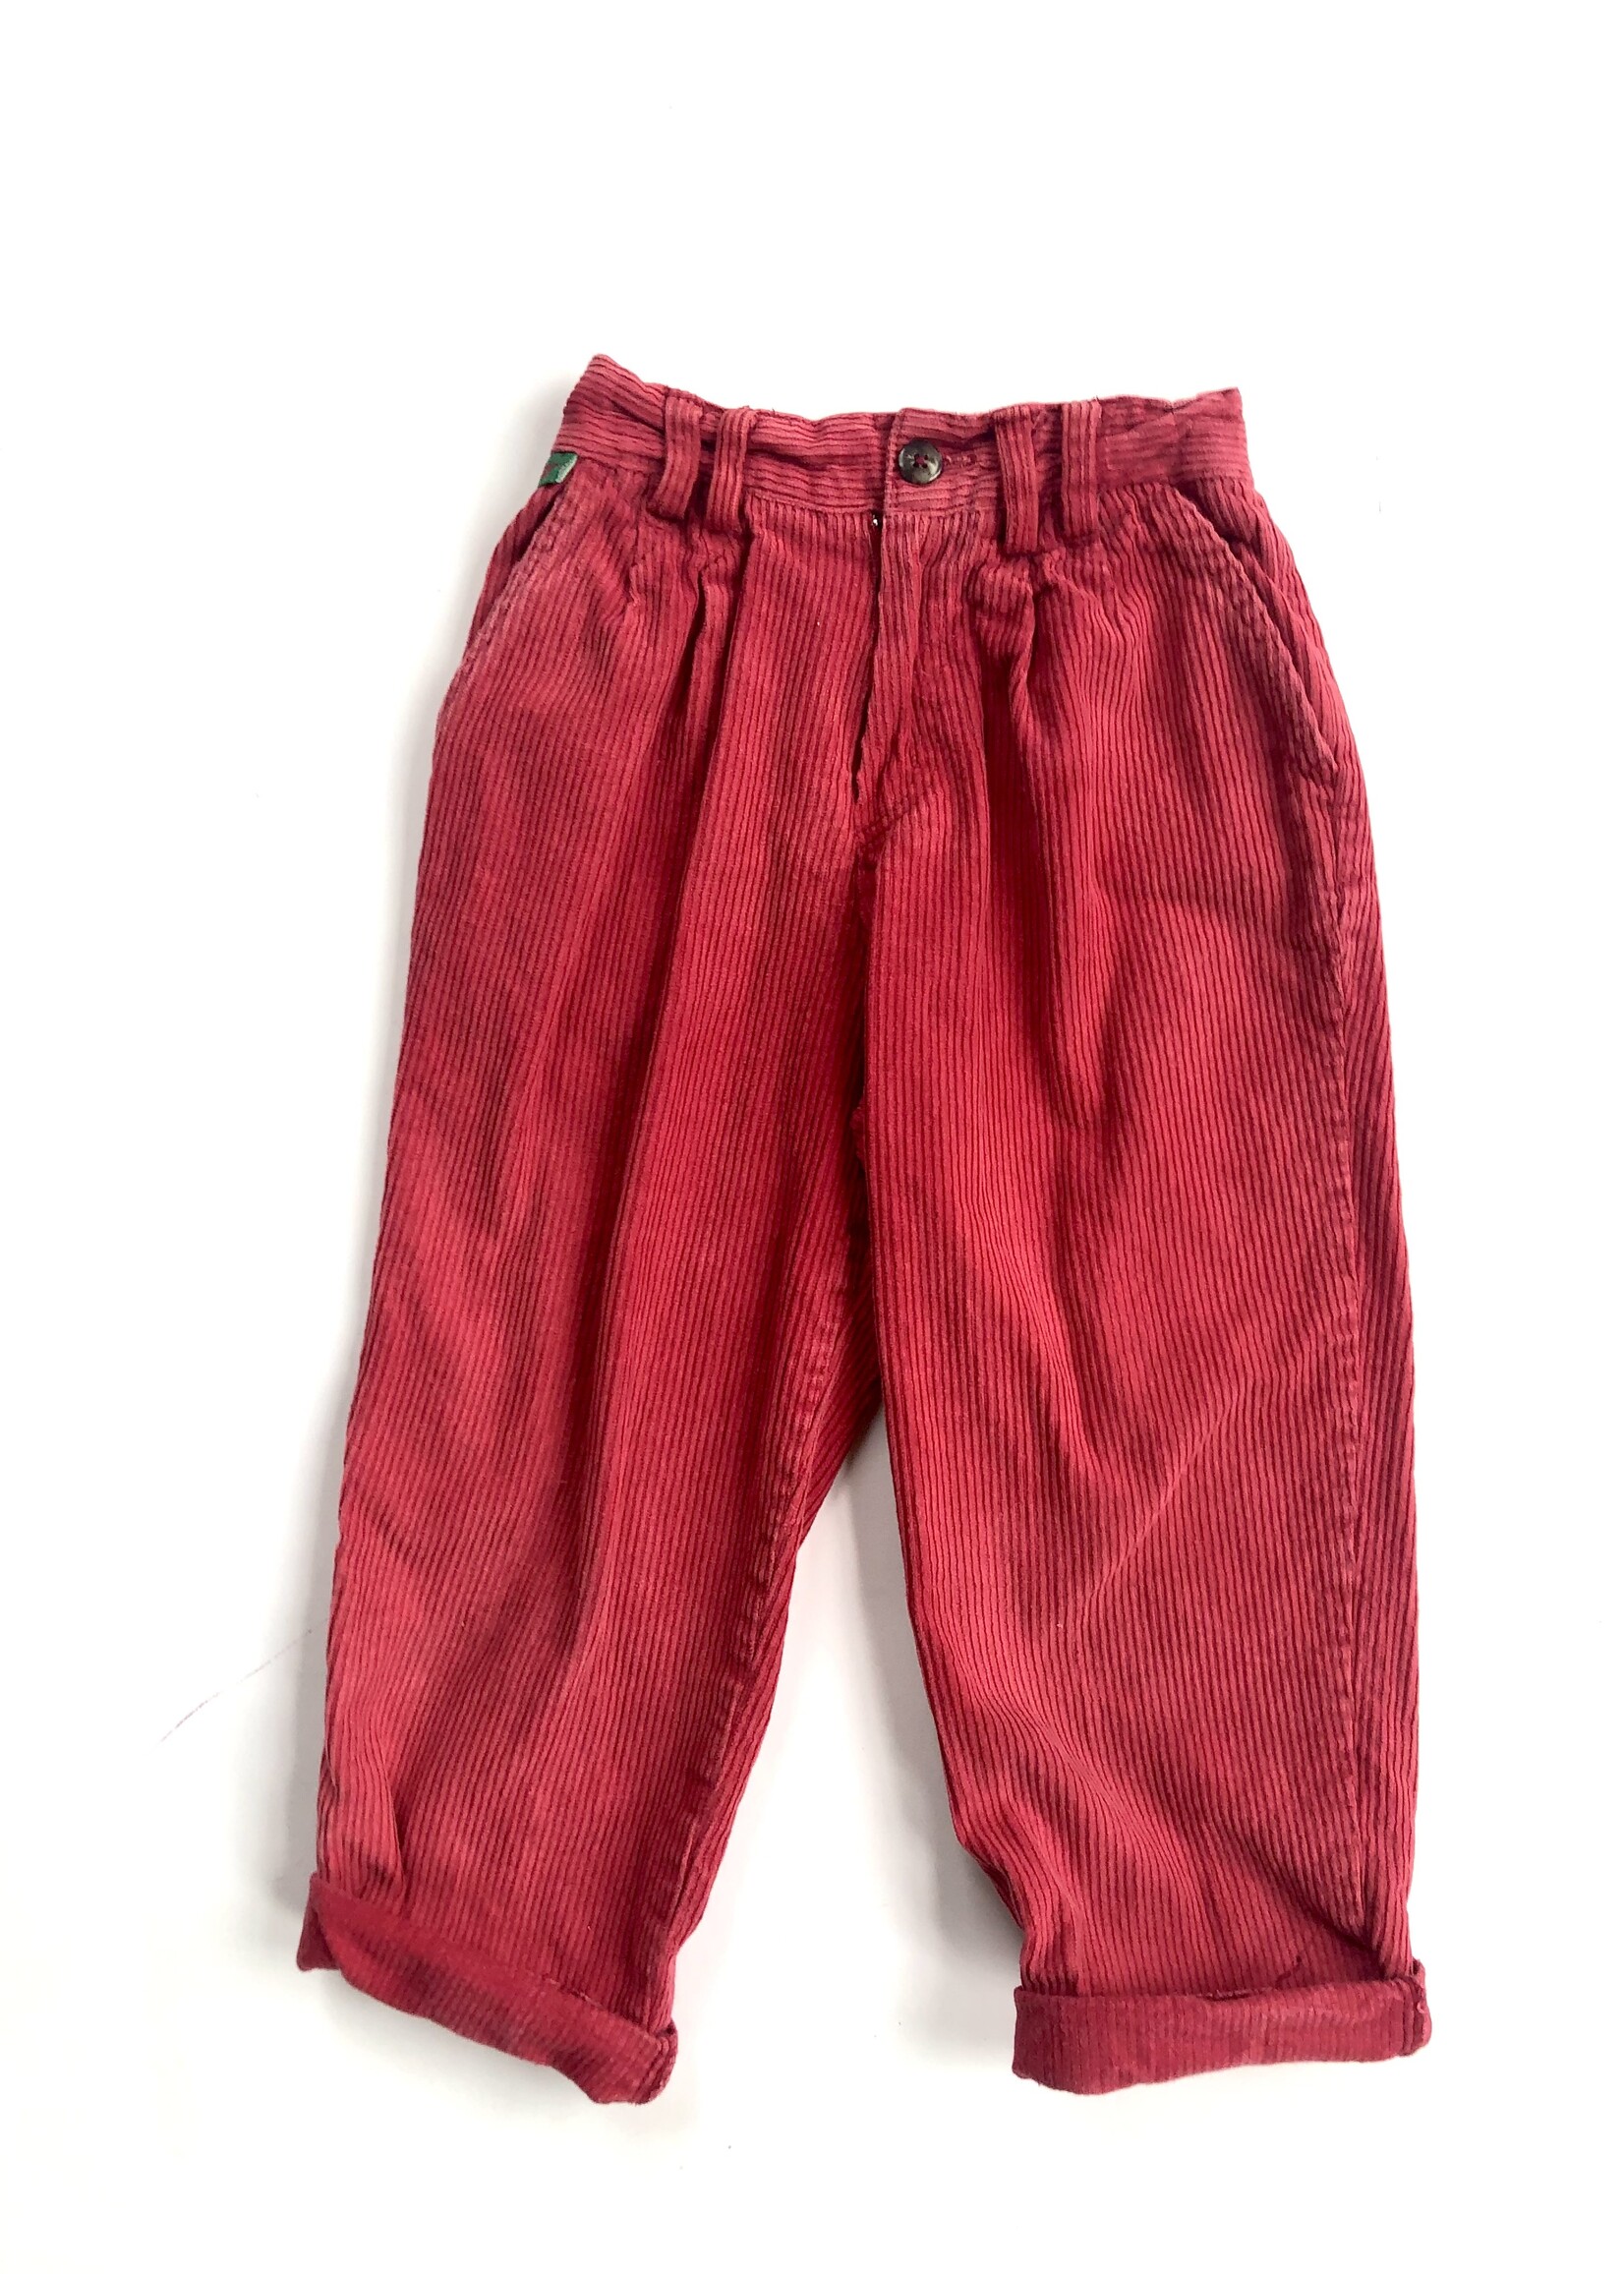 Red corduroy chino pants 3y